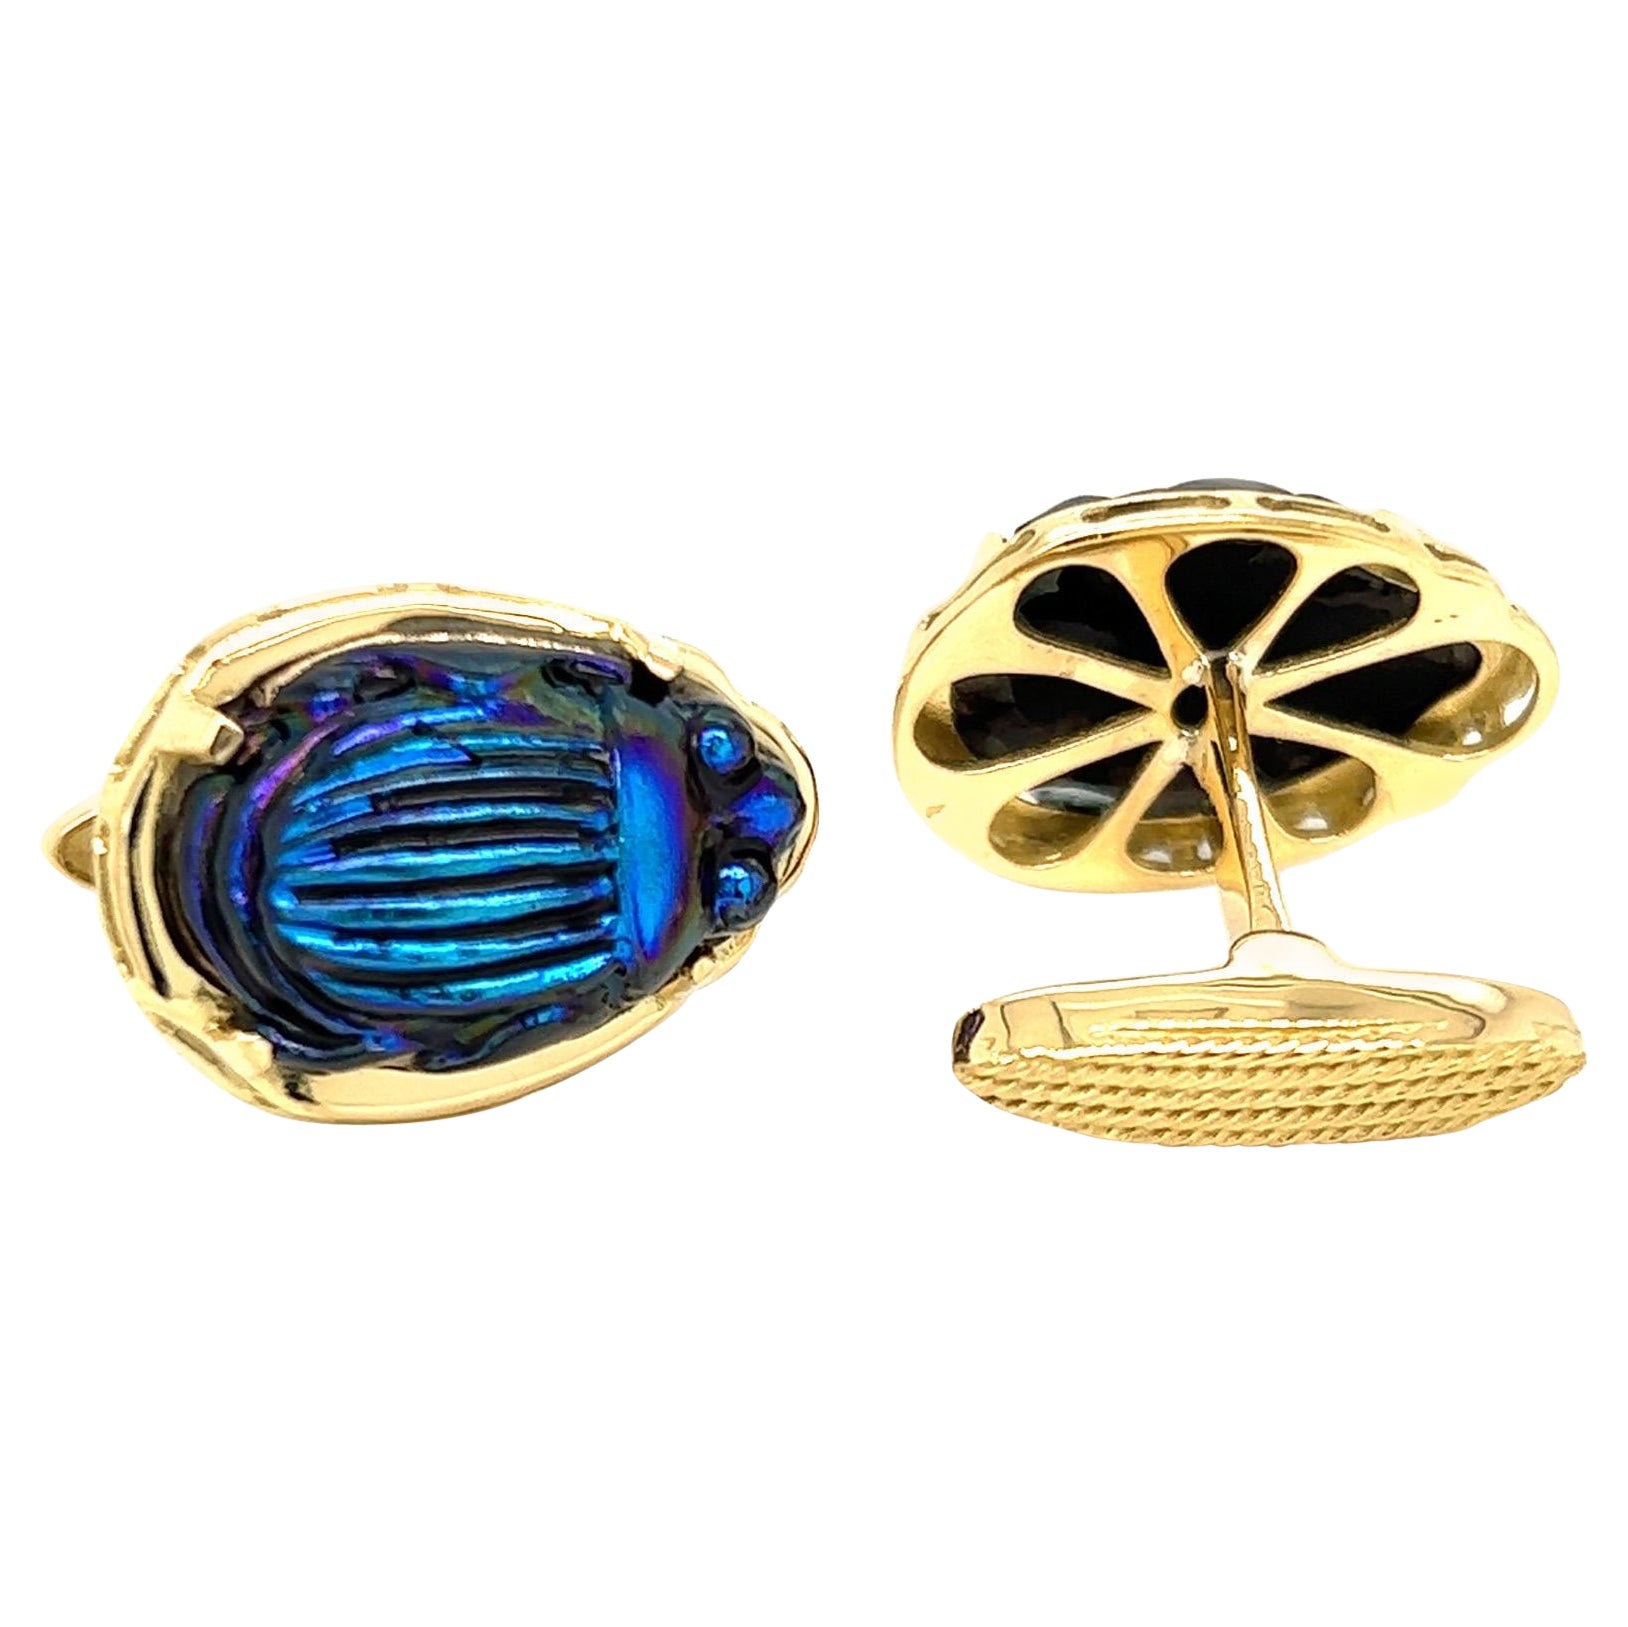 18k Yellow Gold Cufflinks with Vintage Tiffany Favrile Cobalt Blue Glass Scarabs